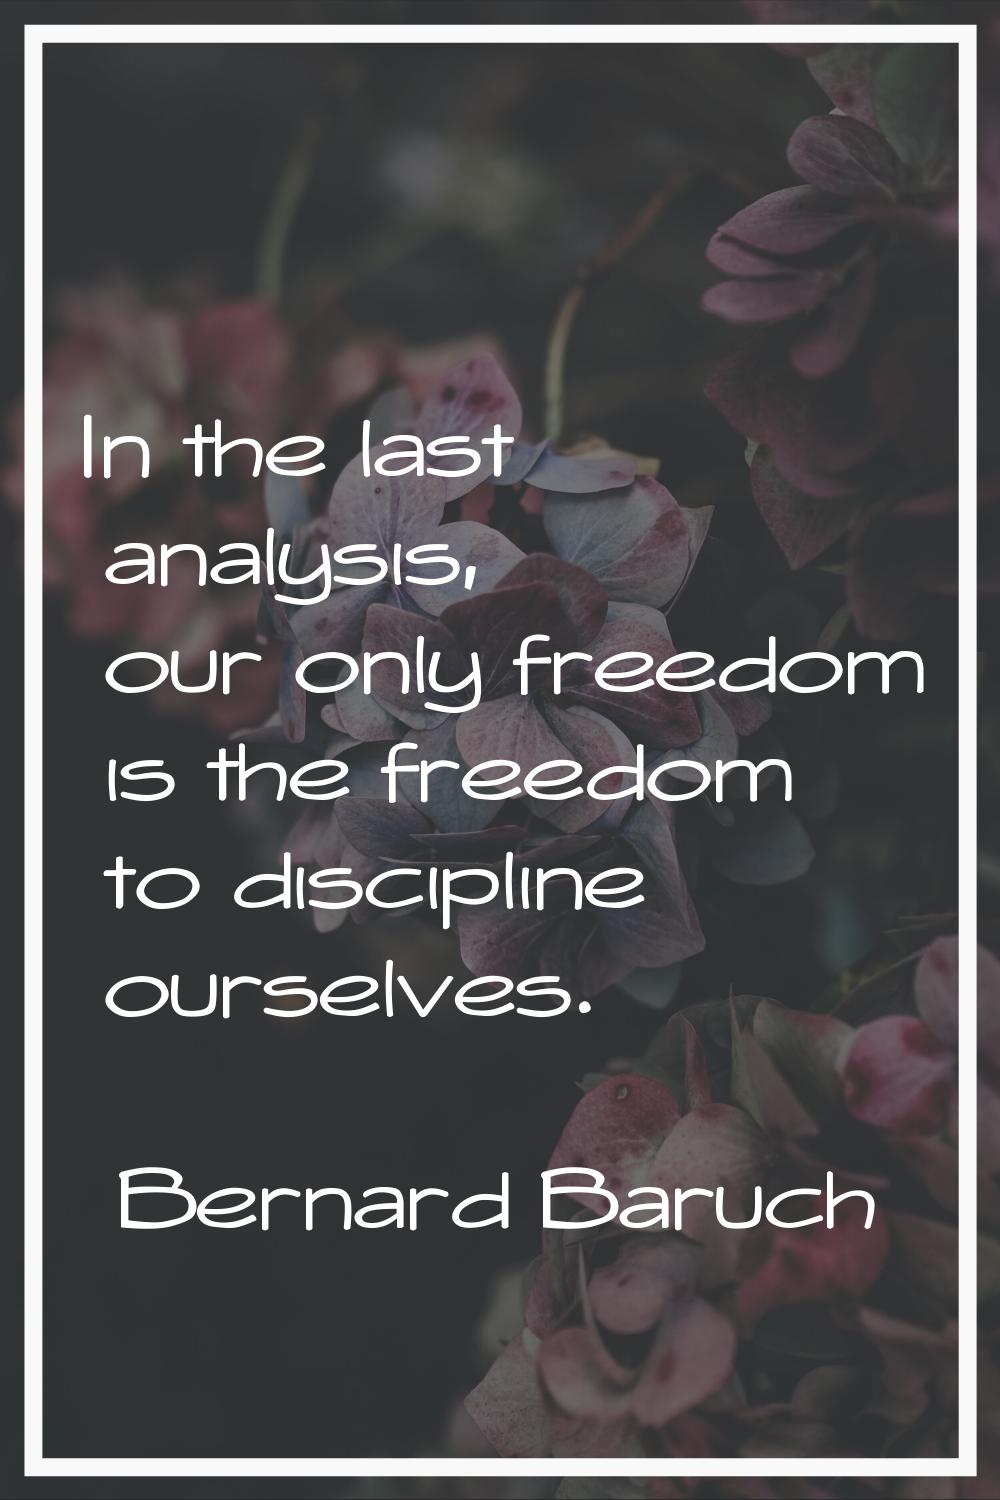 In the last analysis, our only freedom is the freedom to discipline ourselves.